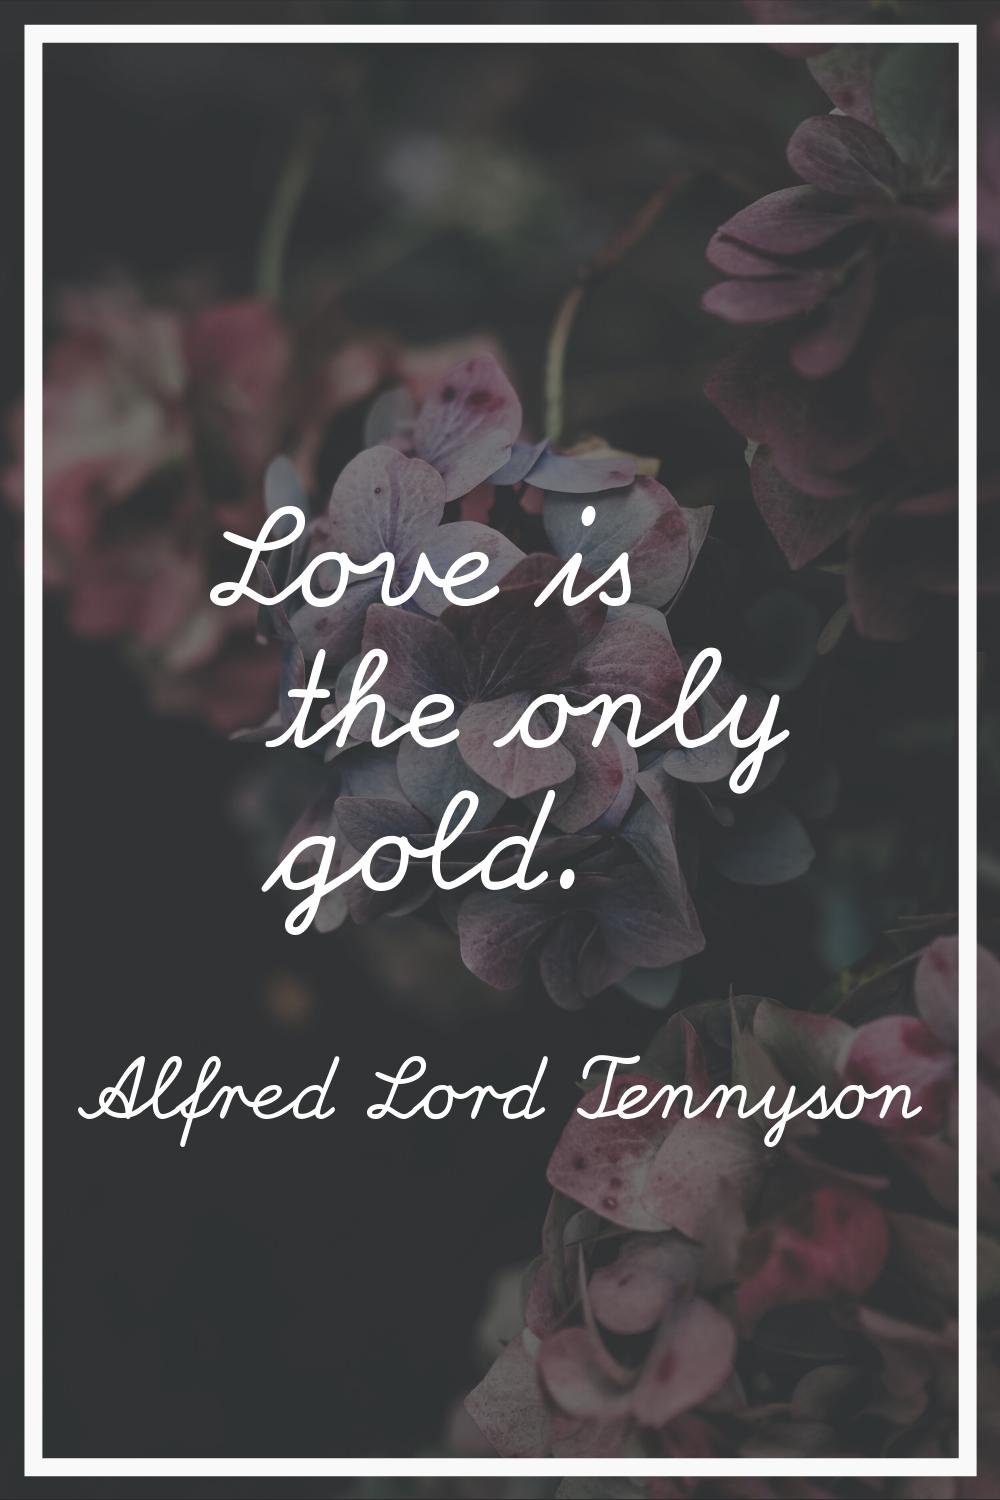 Love is the only gold.